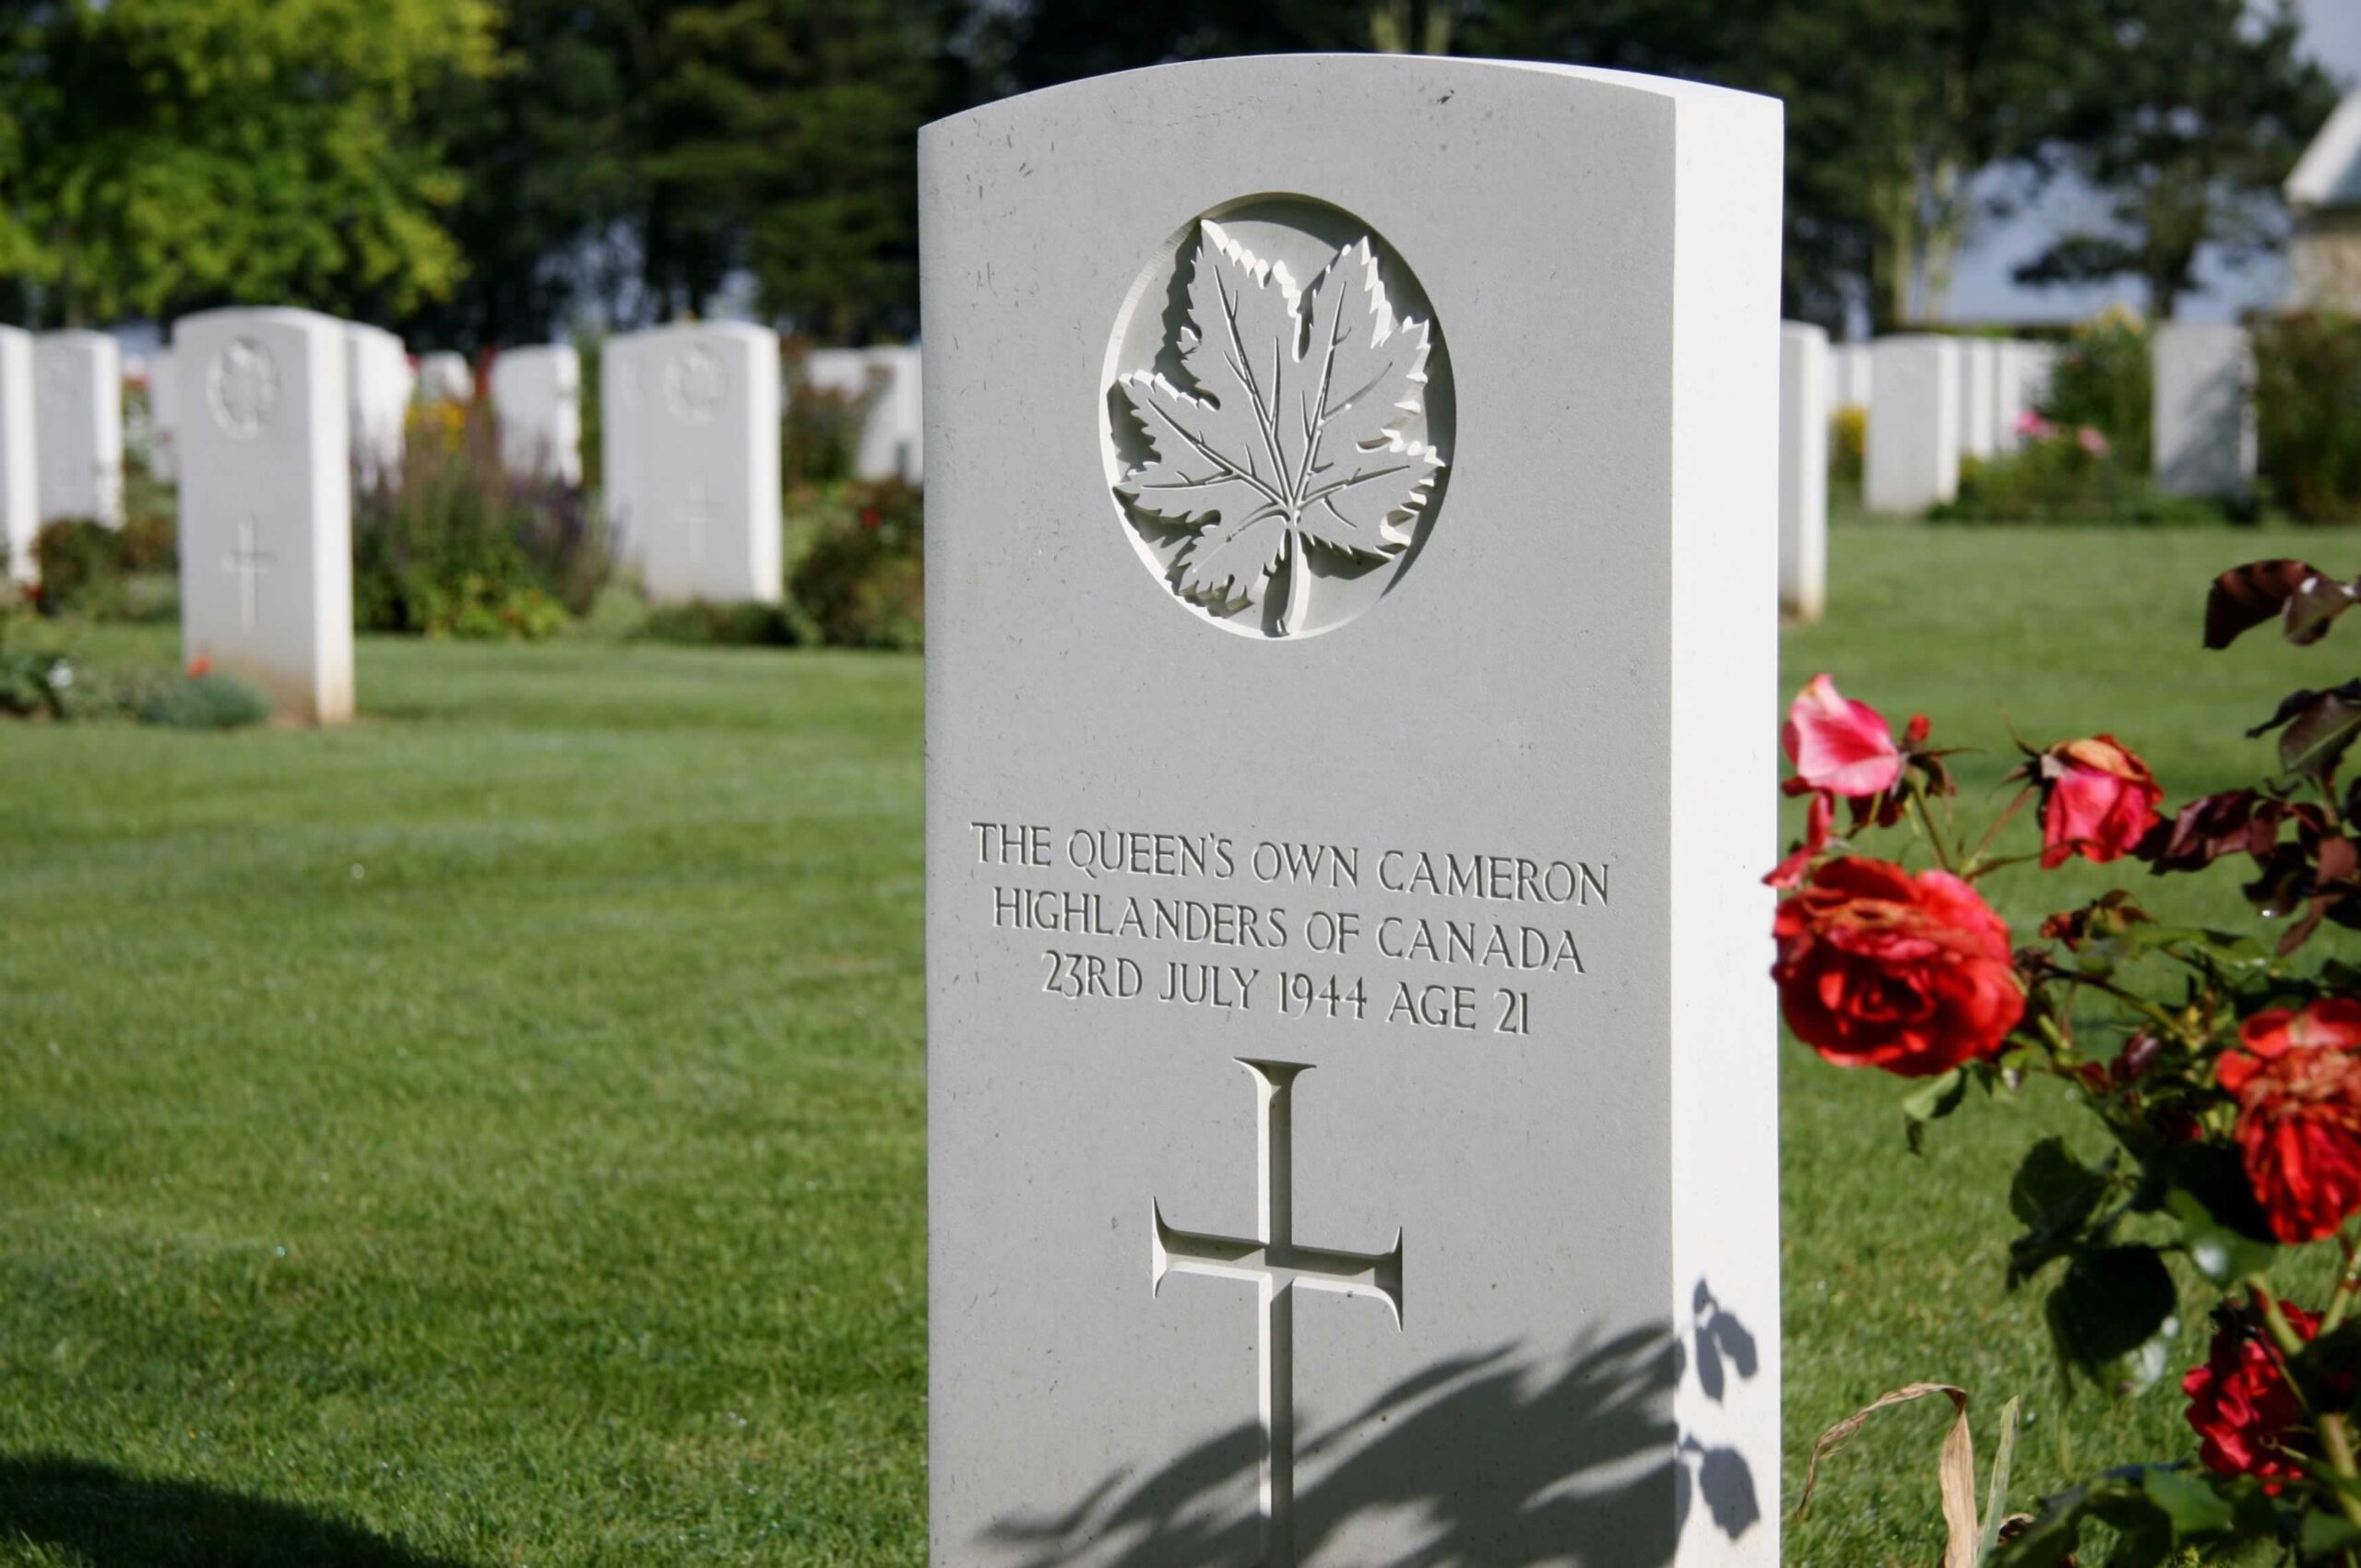 Headstone of 21 year old fallen soldier. Shot taken at the memorial Canadian cemetery in Normandy France, Bény-sur-Mer Canadian War Cemetery.